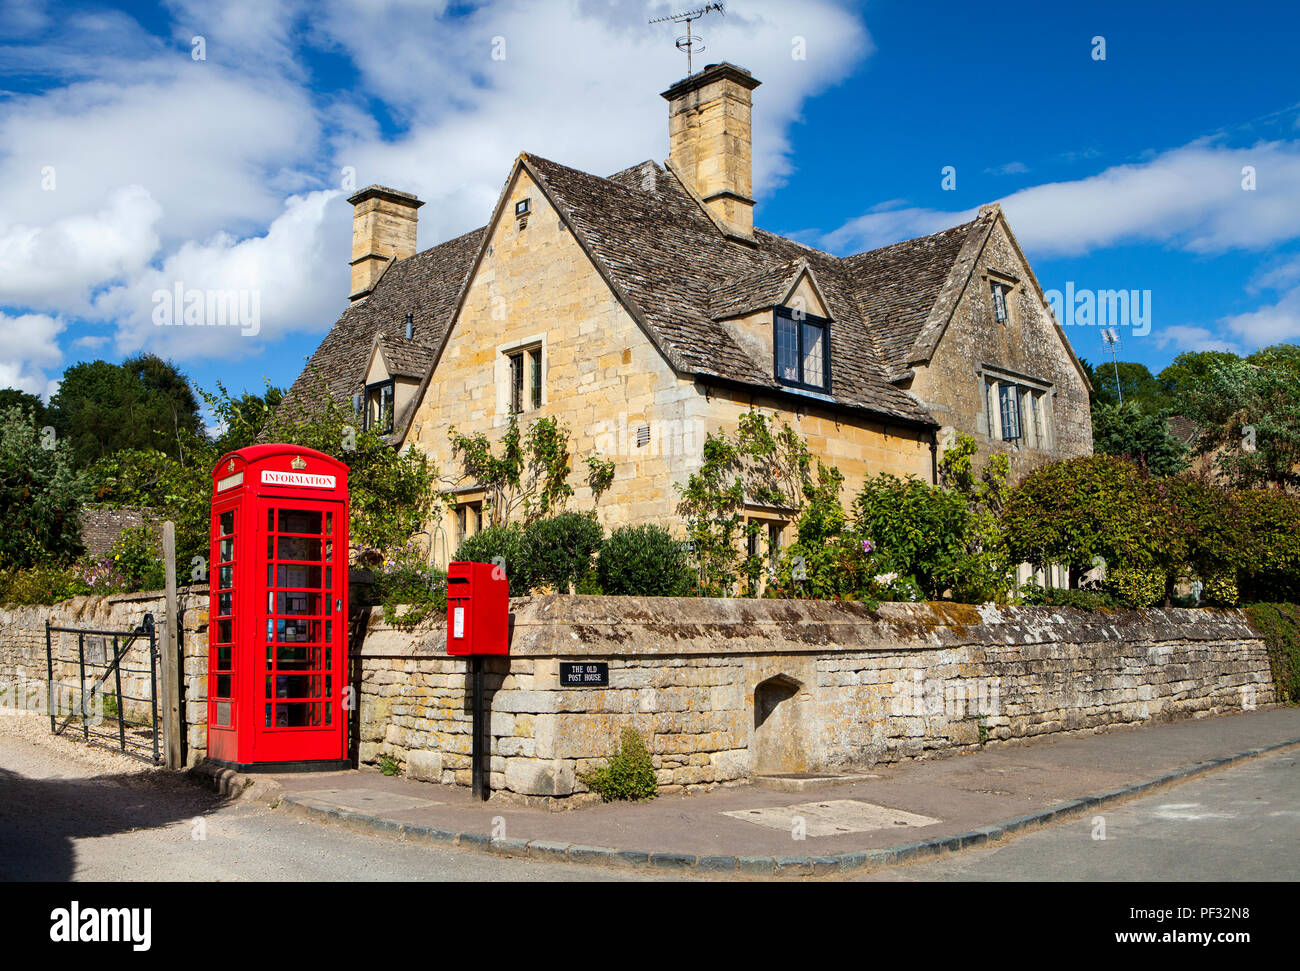 Stanton, UK - 8th August 2018: Stanton is a village in the Cotswold district of Gloucestershire and is built almost completely of Cotswold stone, Stock Photo